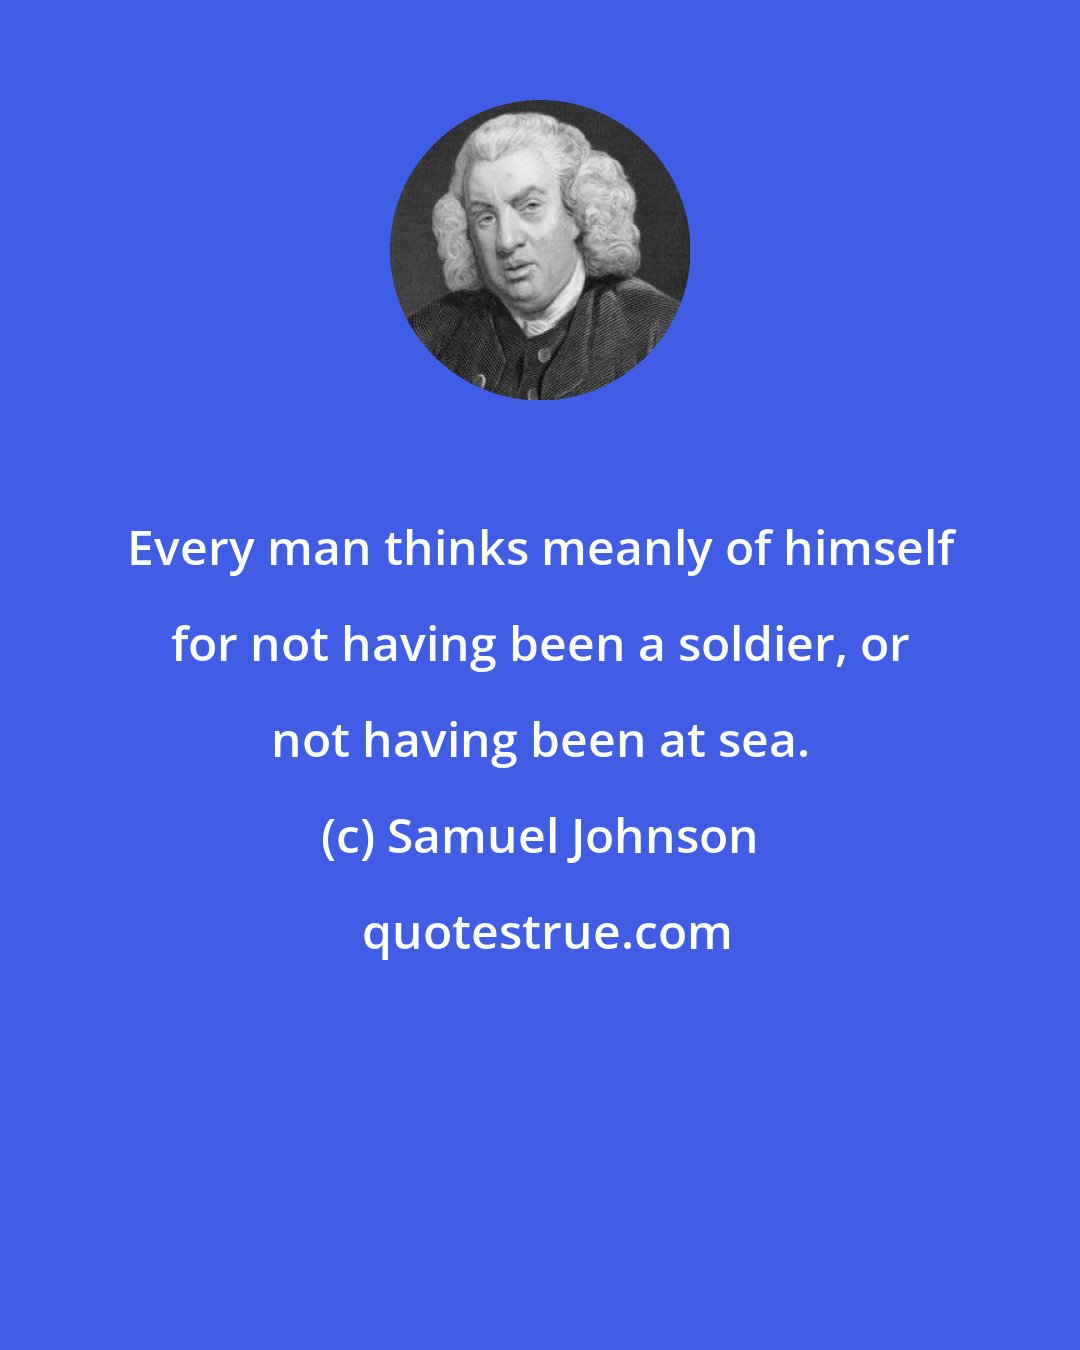 Samuel Johnson: Every man thinks meanly of himself for not having been a soldier, or not having been at sea.